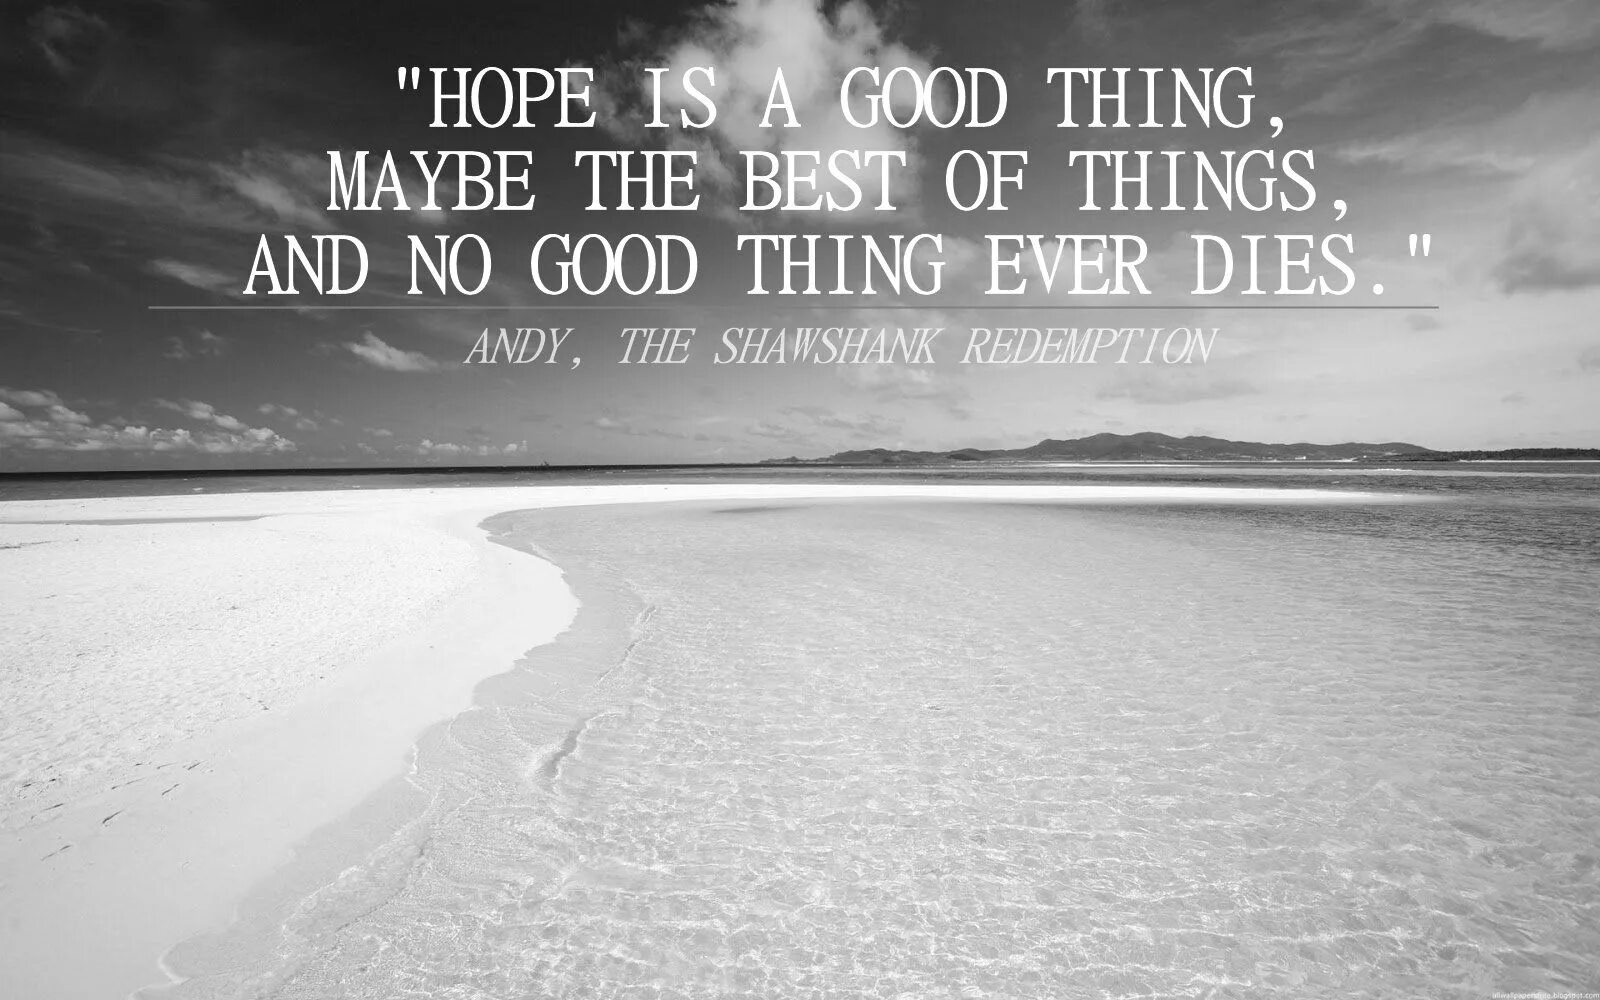 The best thing you can. Shawshank Redemption quotes. Hope is a good thing maybe the best of things and no good thing ever dies. Remember Red hope is a good thing. Shawshank Redemption.